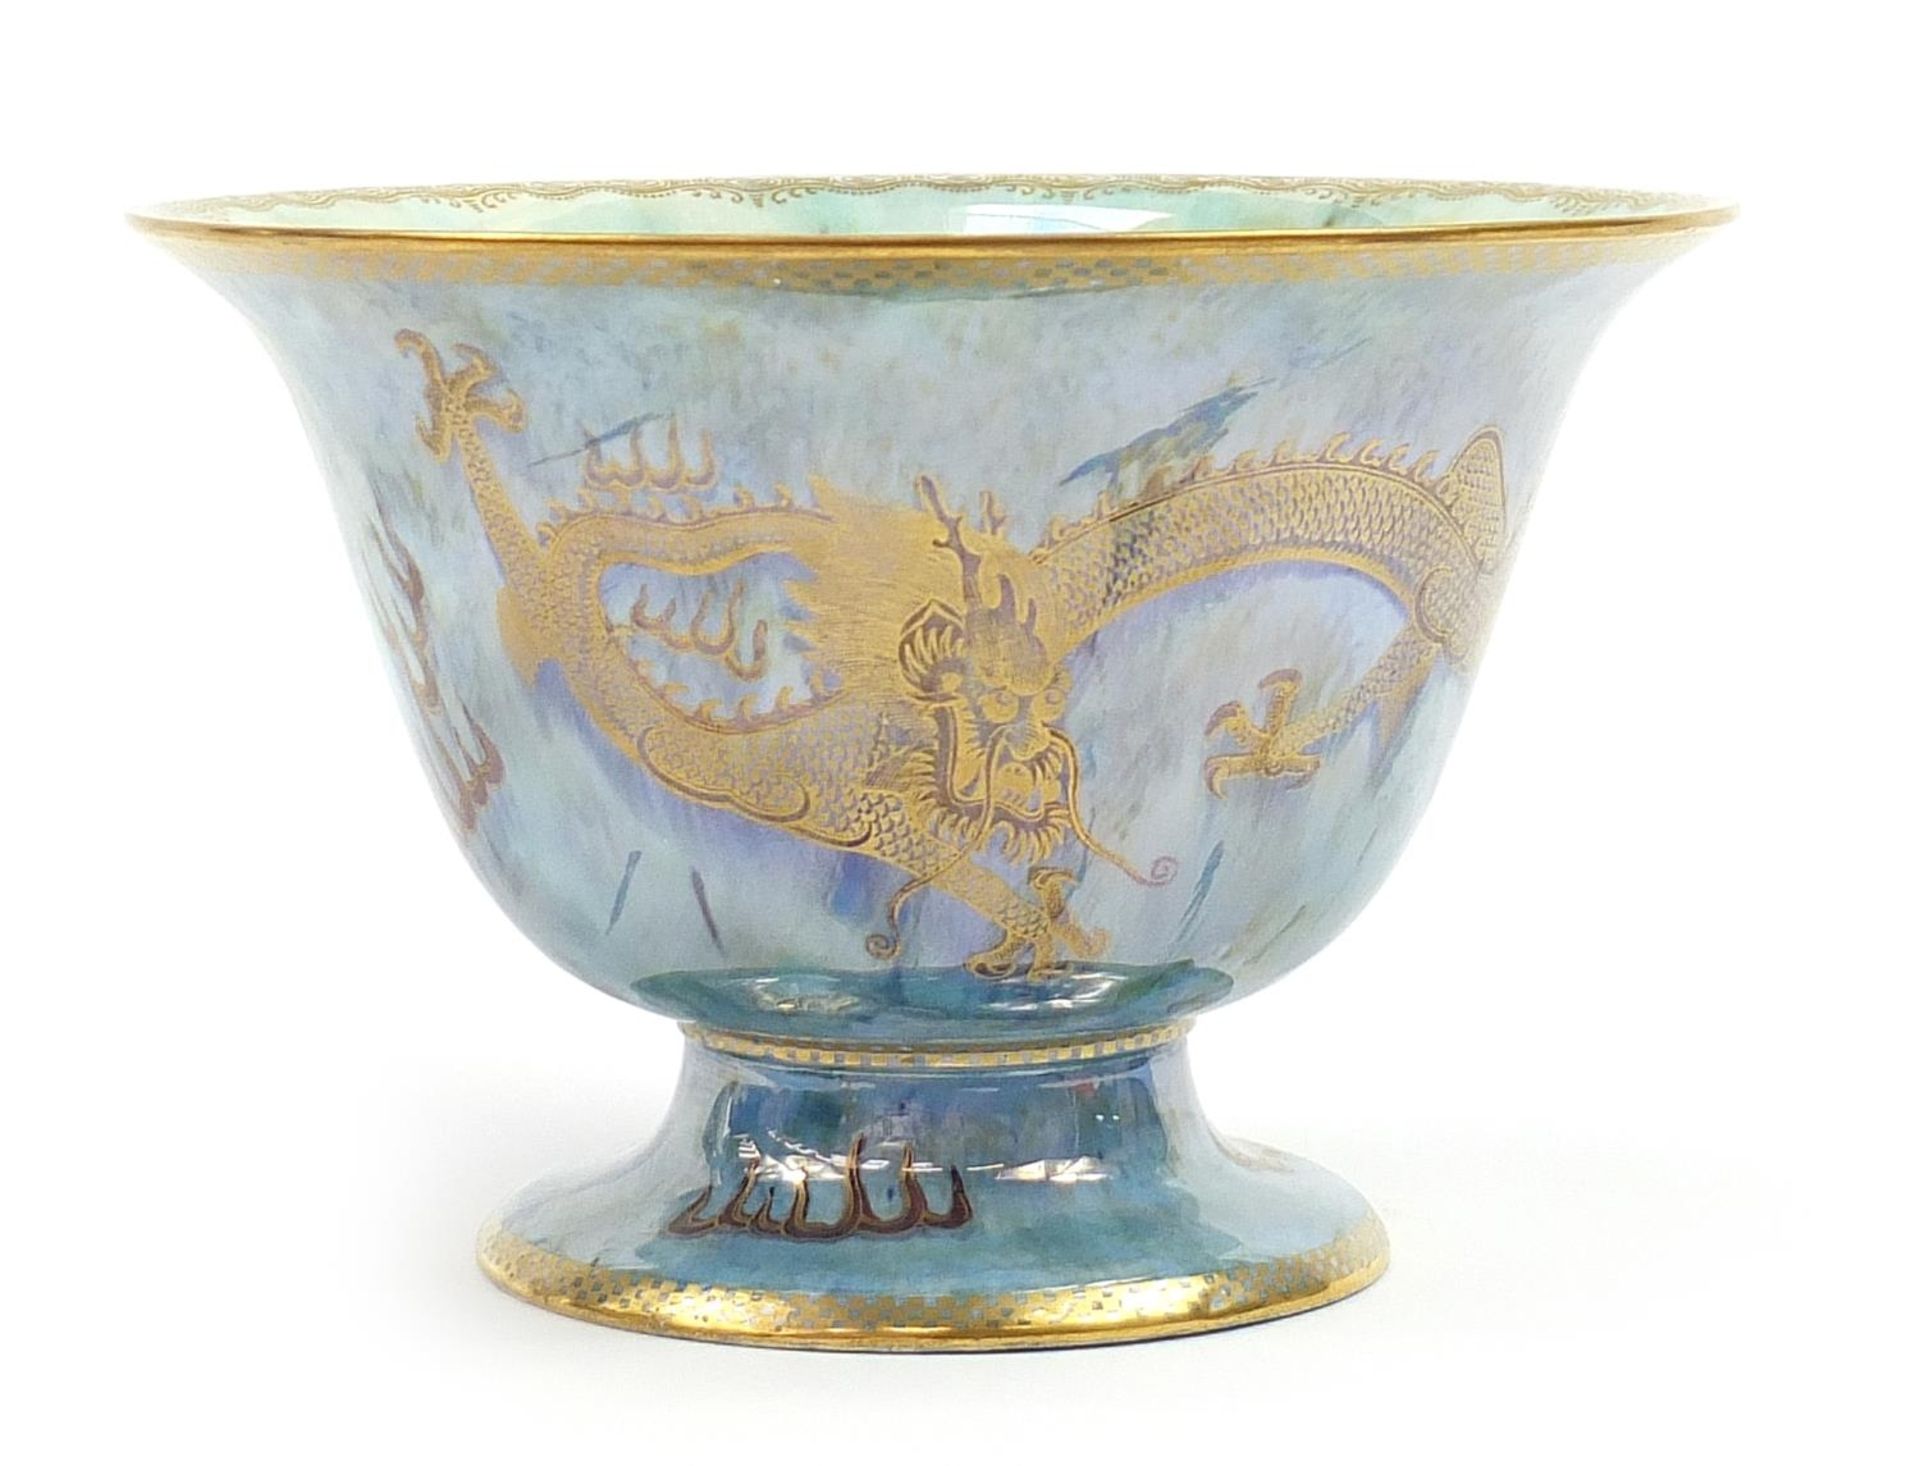 Wedgwood Fairyland lustre footed bowl hand painted with dragons, inscribed Z4829 to the base, 22cm - Image 2 of 5